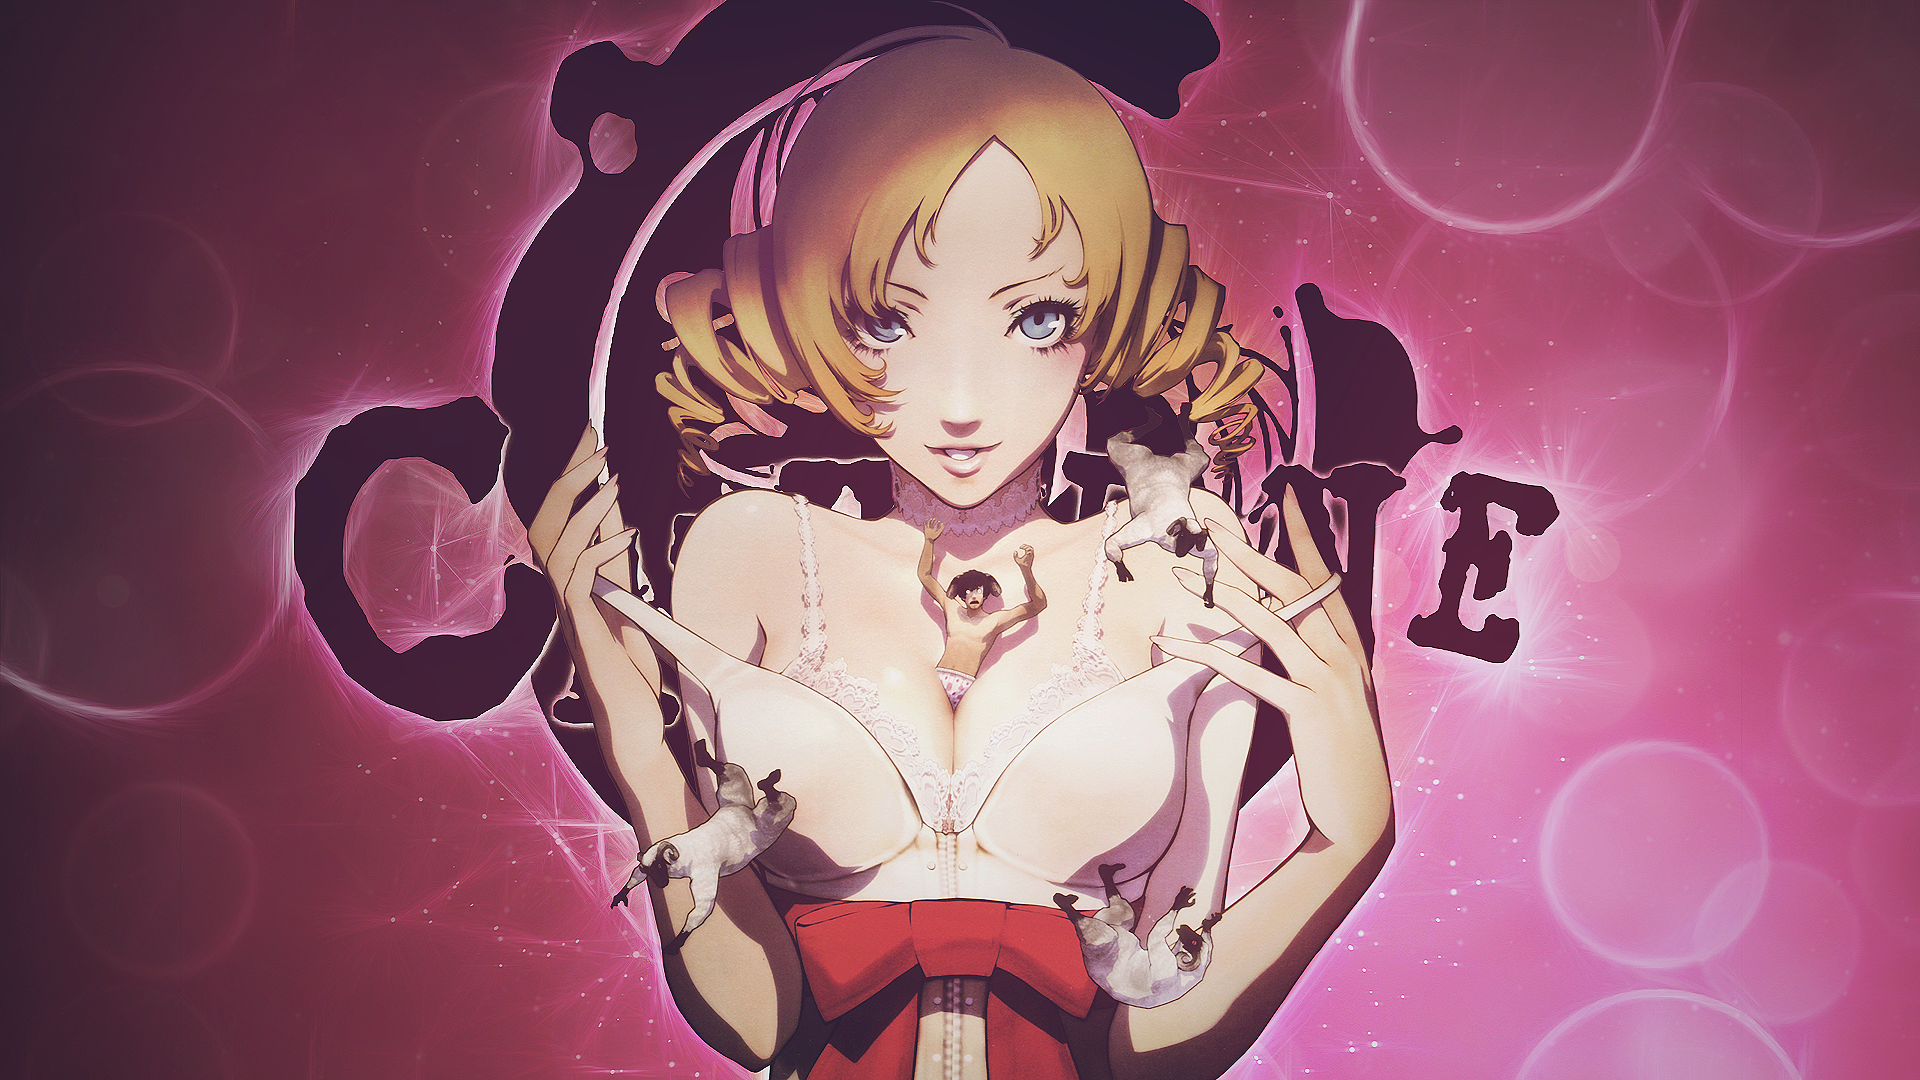 Wallpaper] Catherine by PMazzuco on DeviantArt